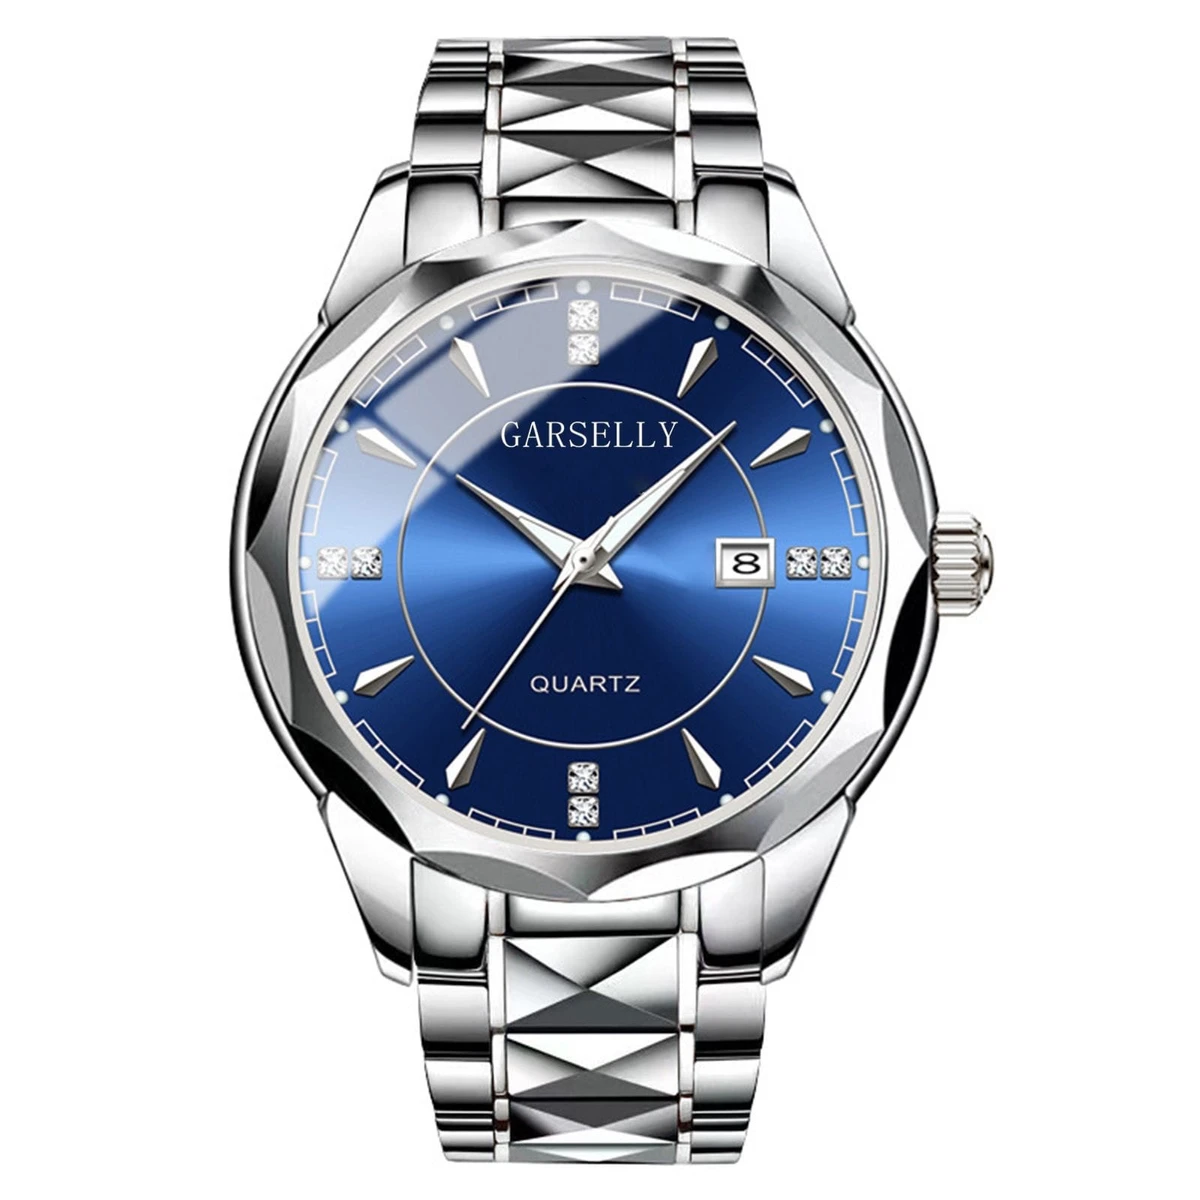 GARSELLY - Luxury Man Wristwatch Waterproof Watch for Men Stainless Steel Men's Watches High Quality+Box-Silver&Blue